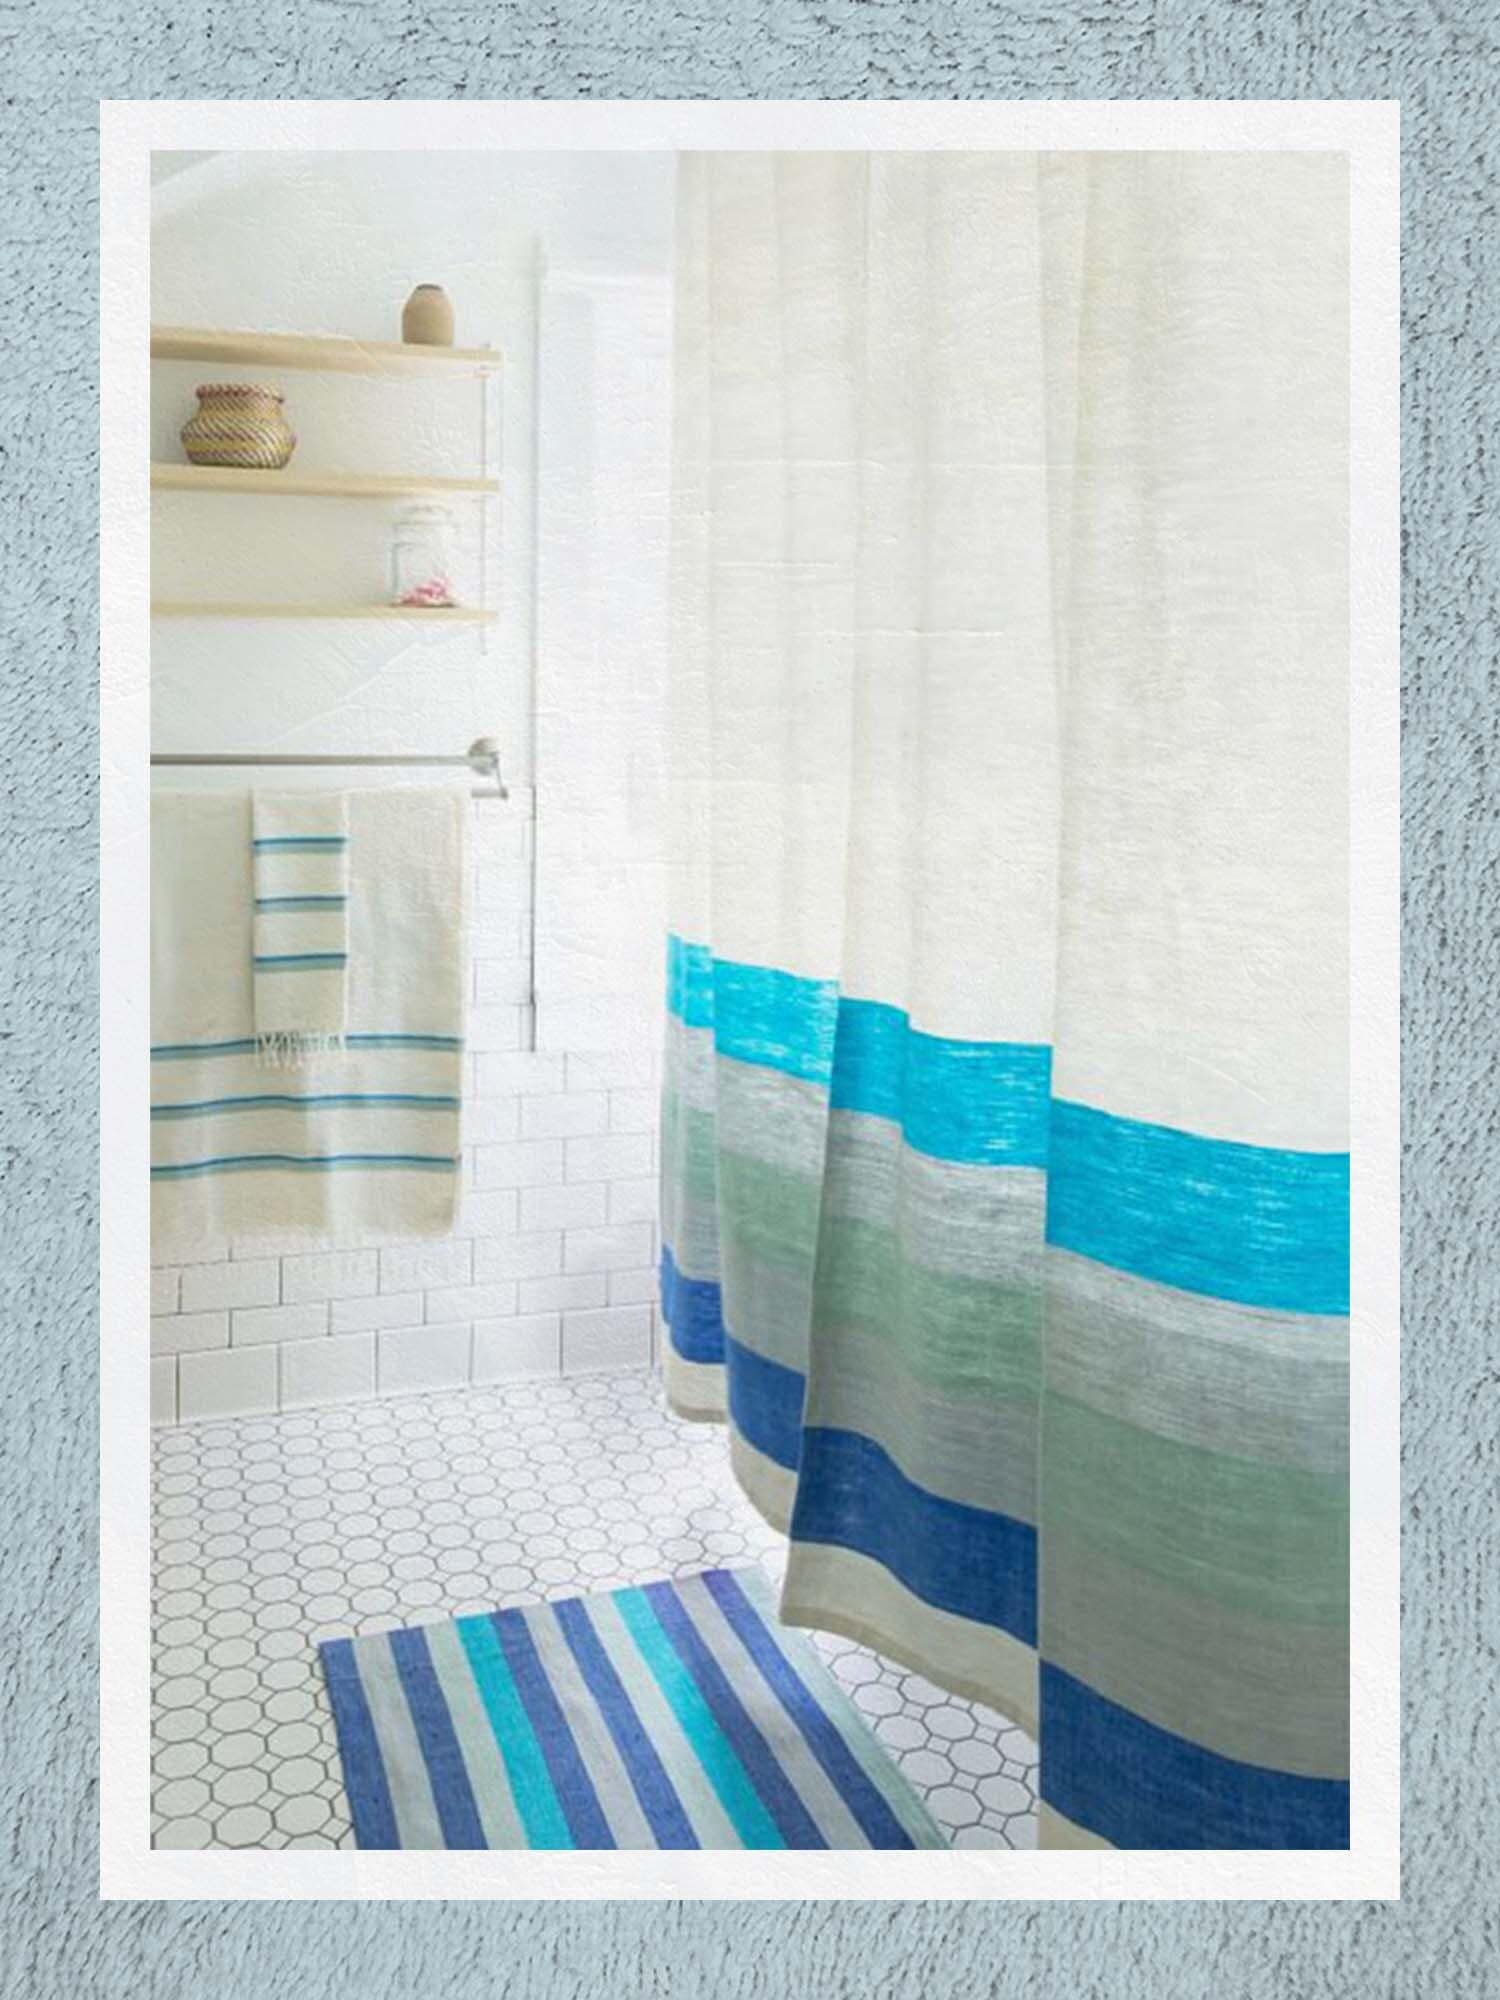 The Best Bath Mats Are an Even Quicker Room Refresh Than a Coat of Paint